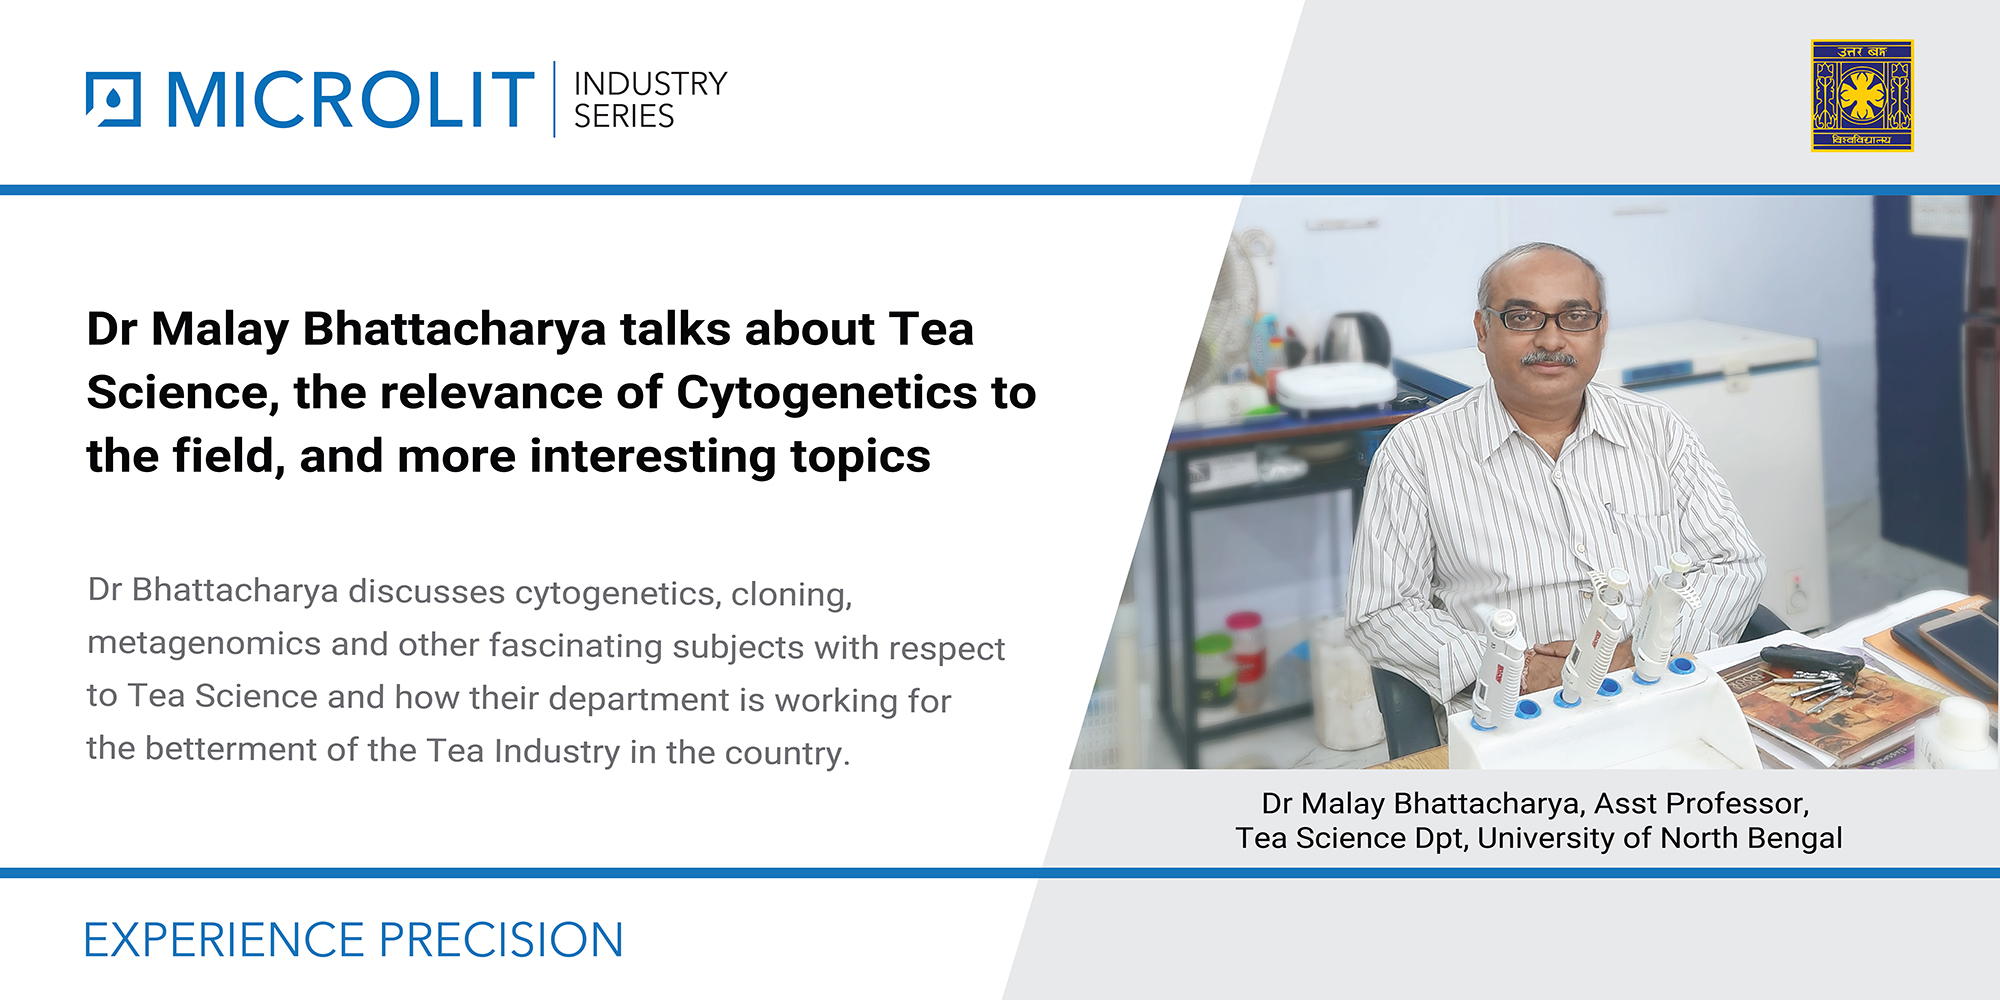 Dr Bhattacharya, Assistant Professor, Department of Tea Science, University of North Bengal discusses Tea Science, Cytogenetics, Tea Link and more